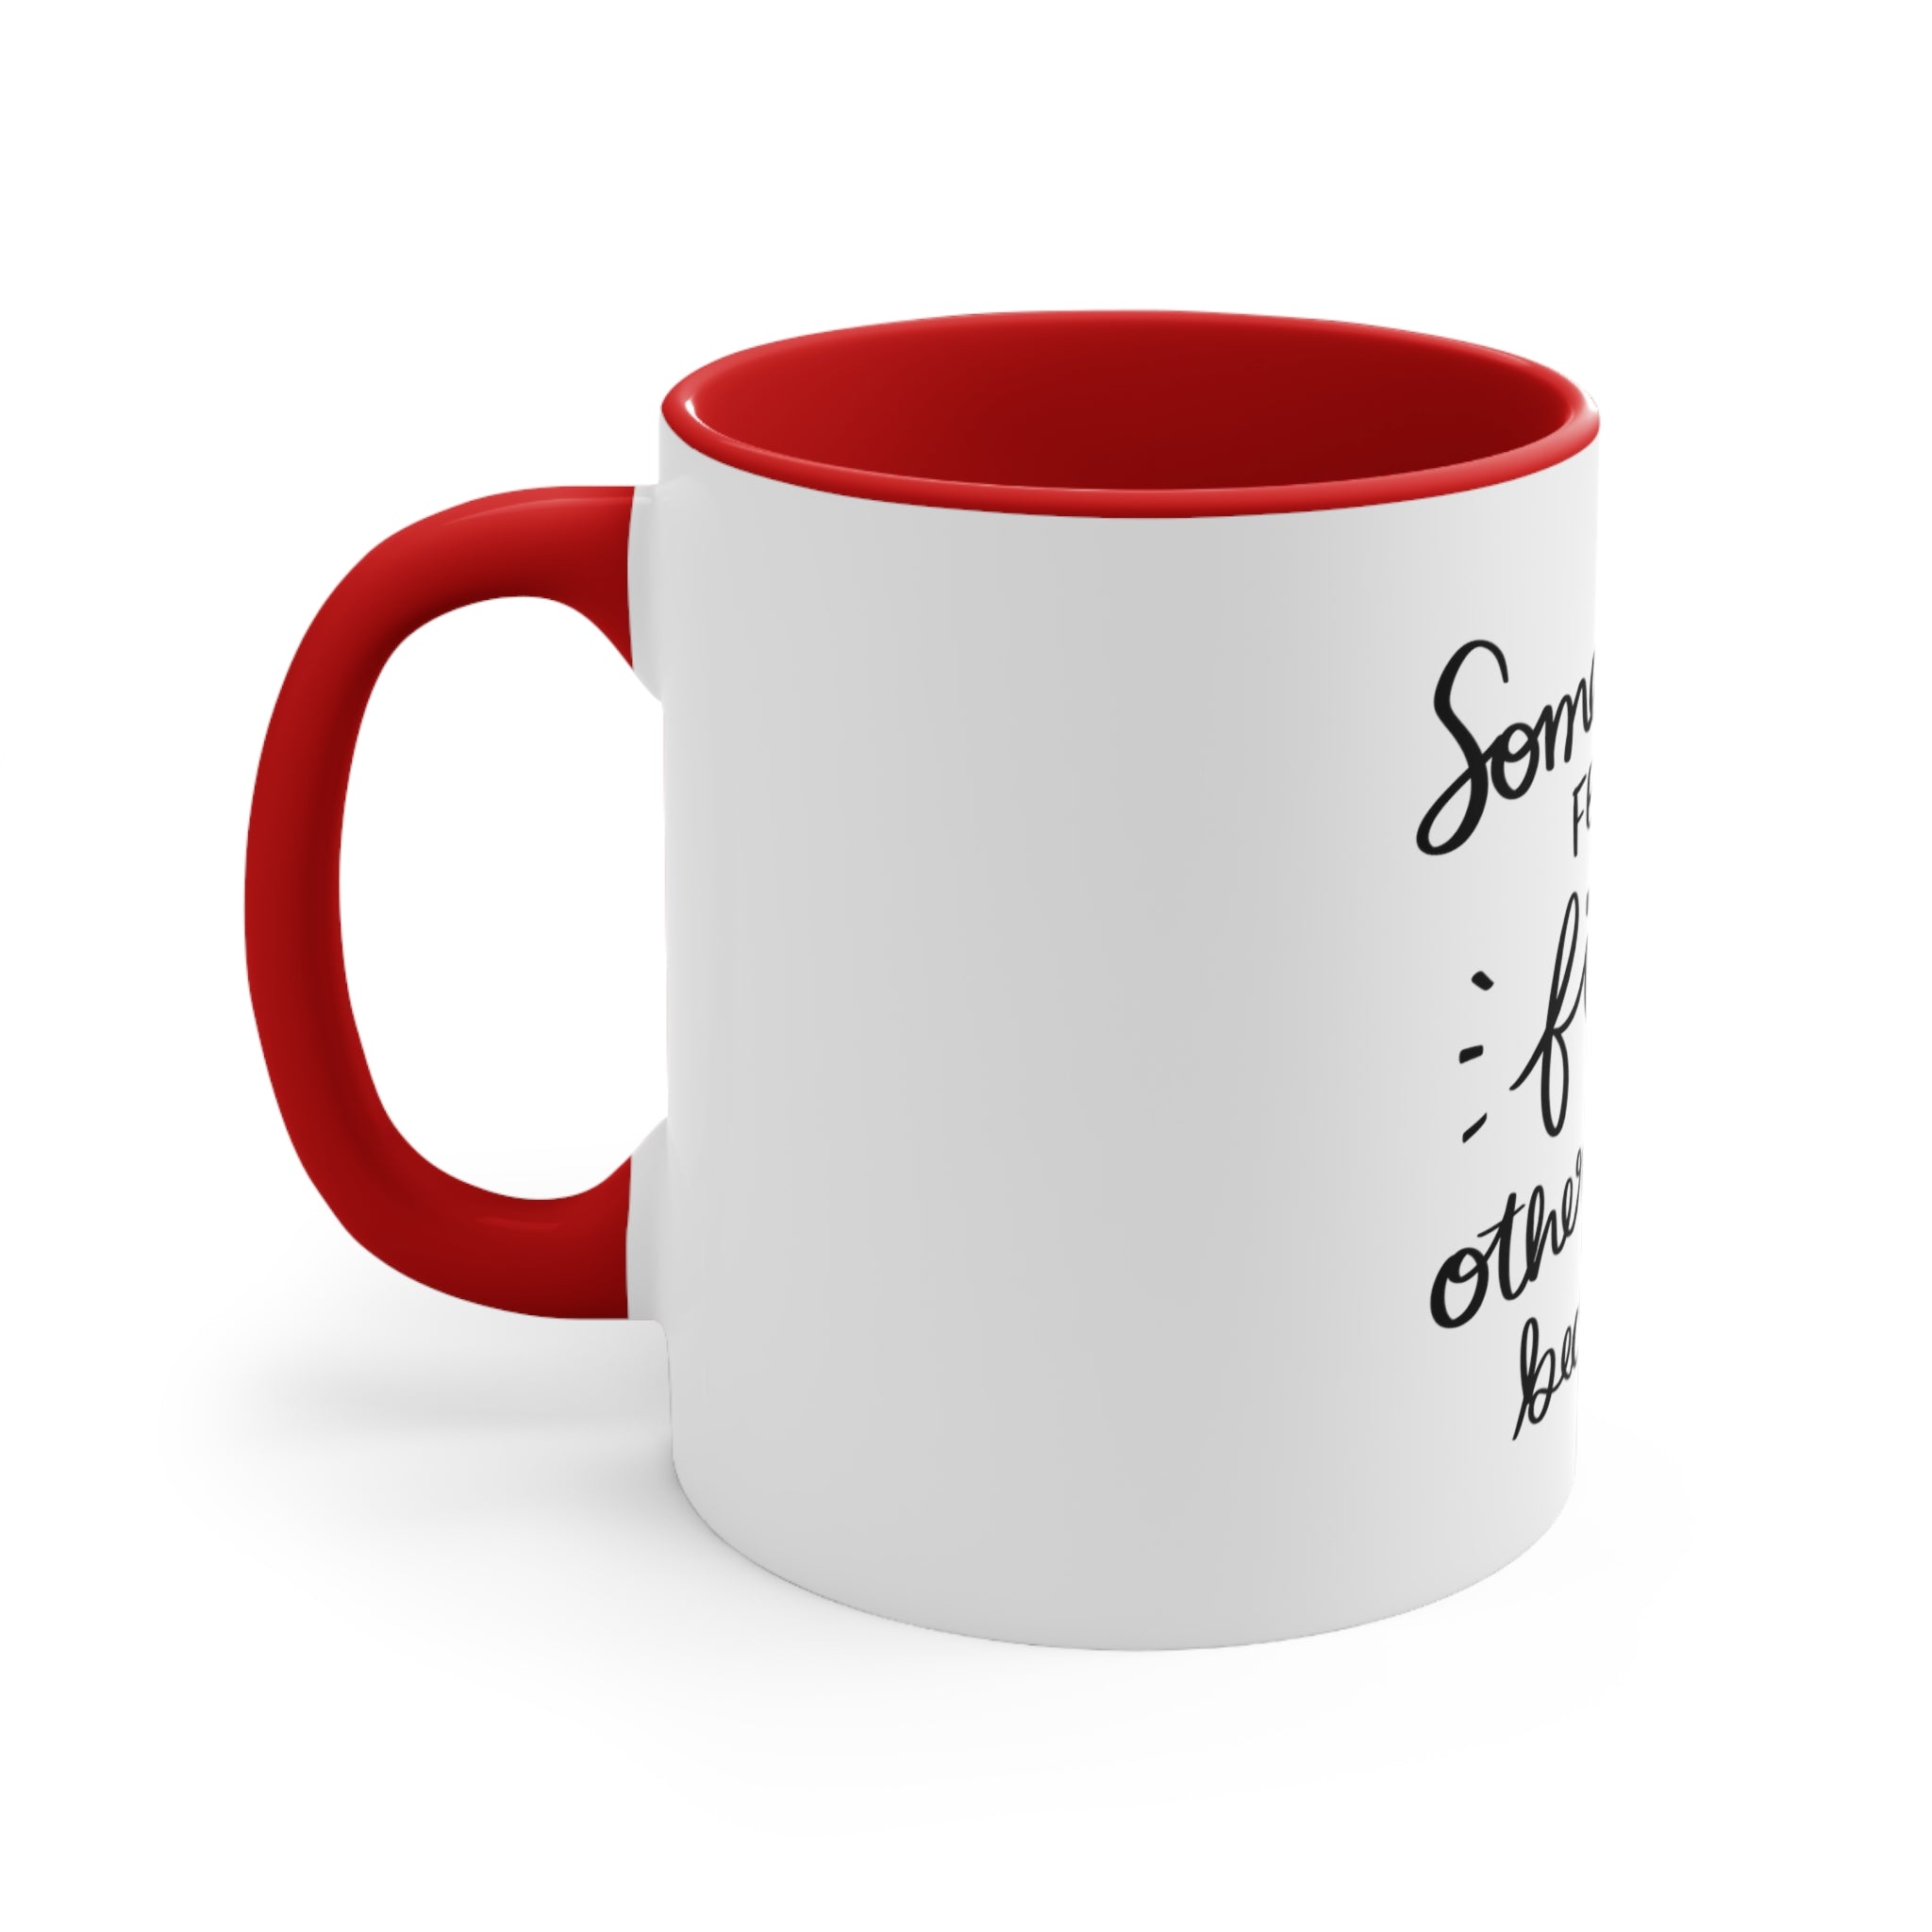 Some Women Fear The Fire Others Simply Become It Accent Coffee Mug, 11oz